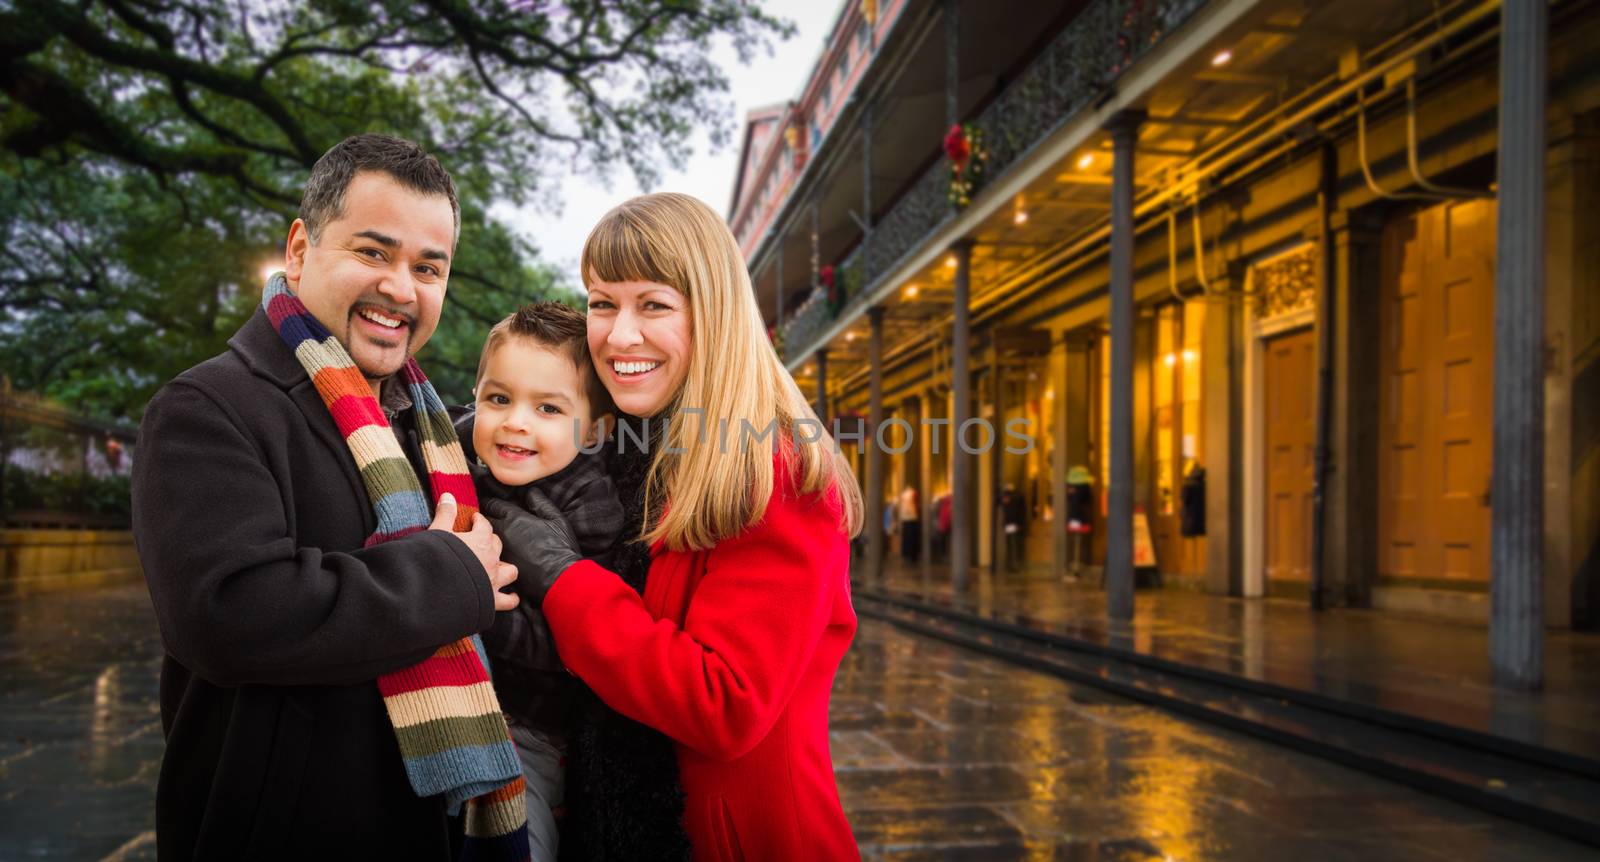 Happy Young Mixed Race Family Enjoying an Evening in New Orleans, Louisiana